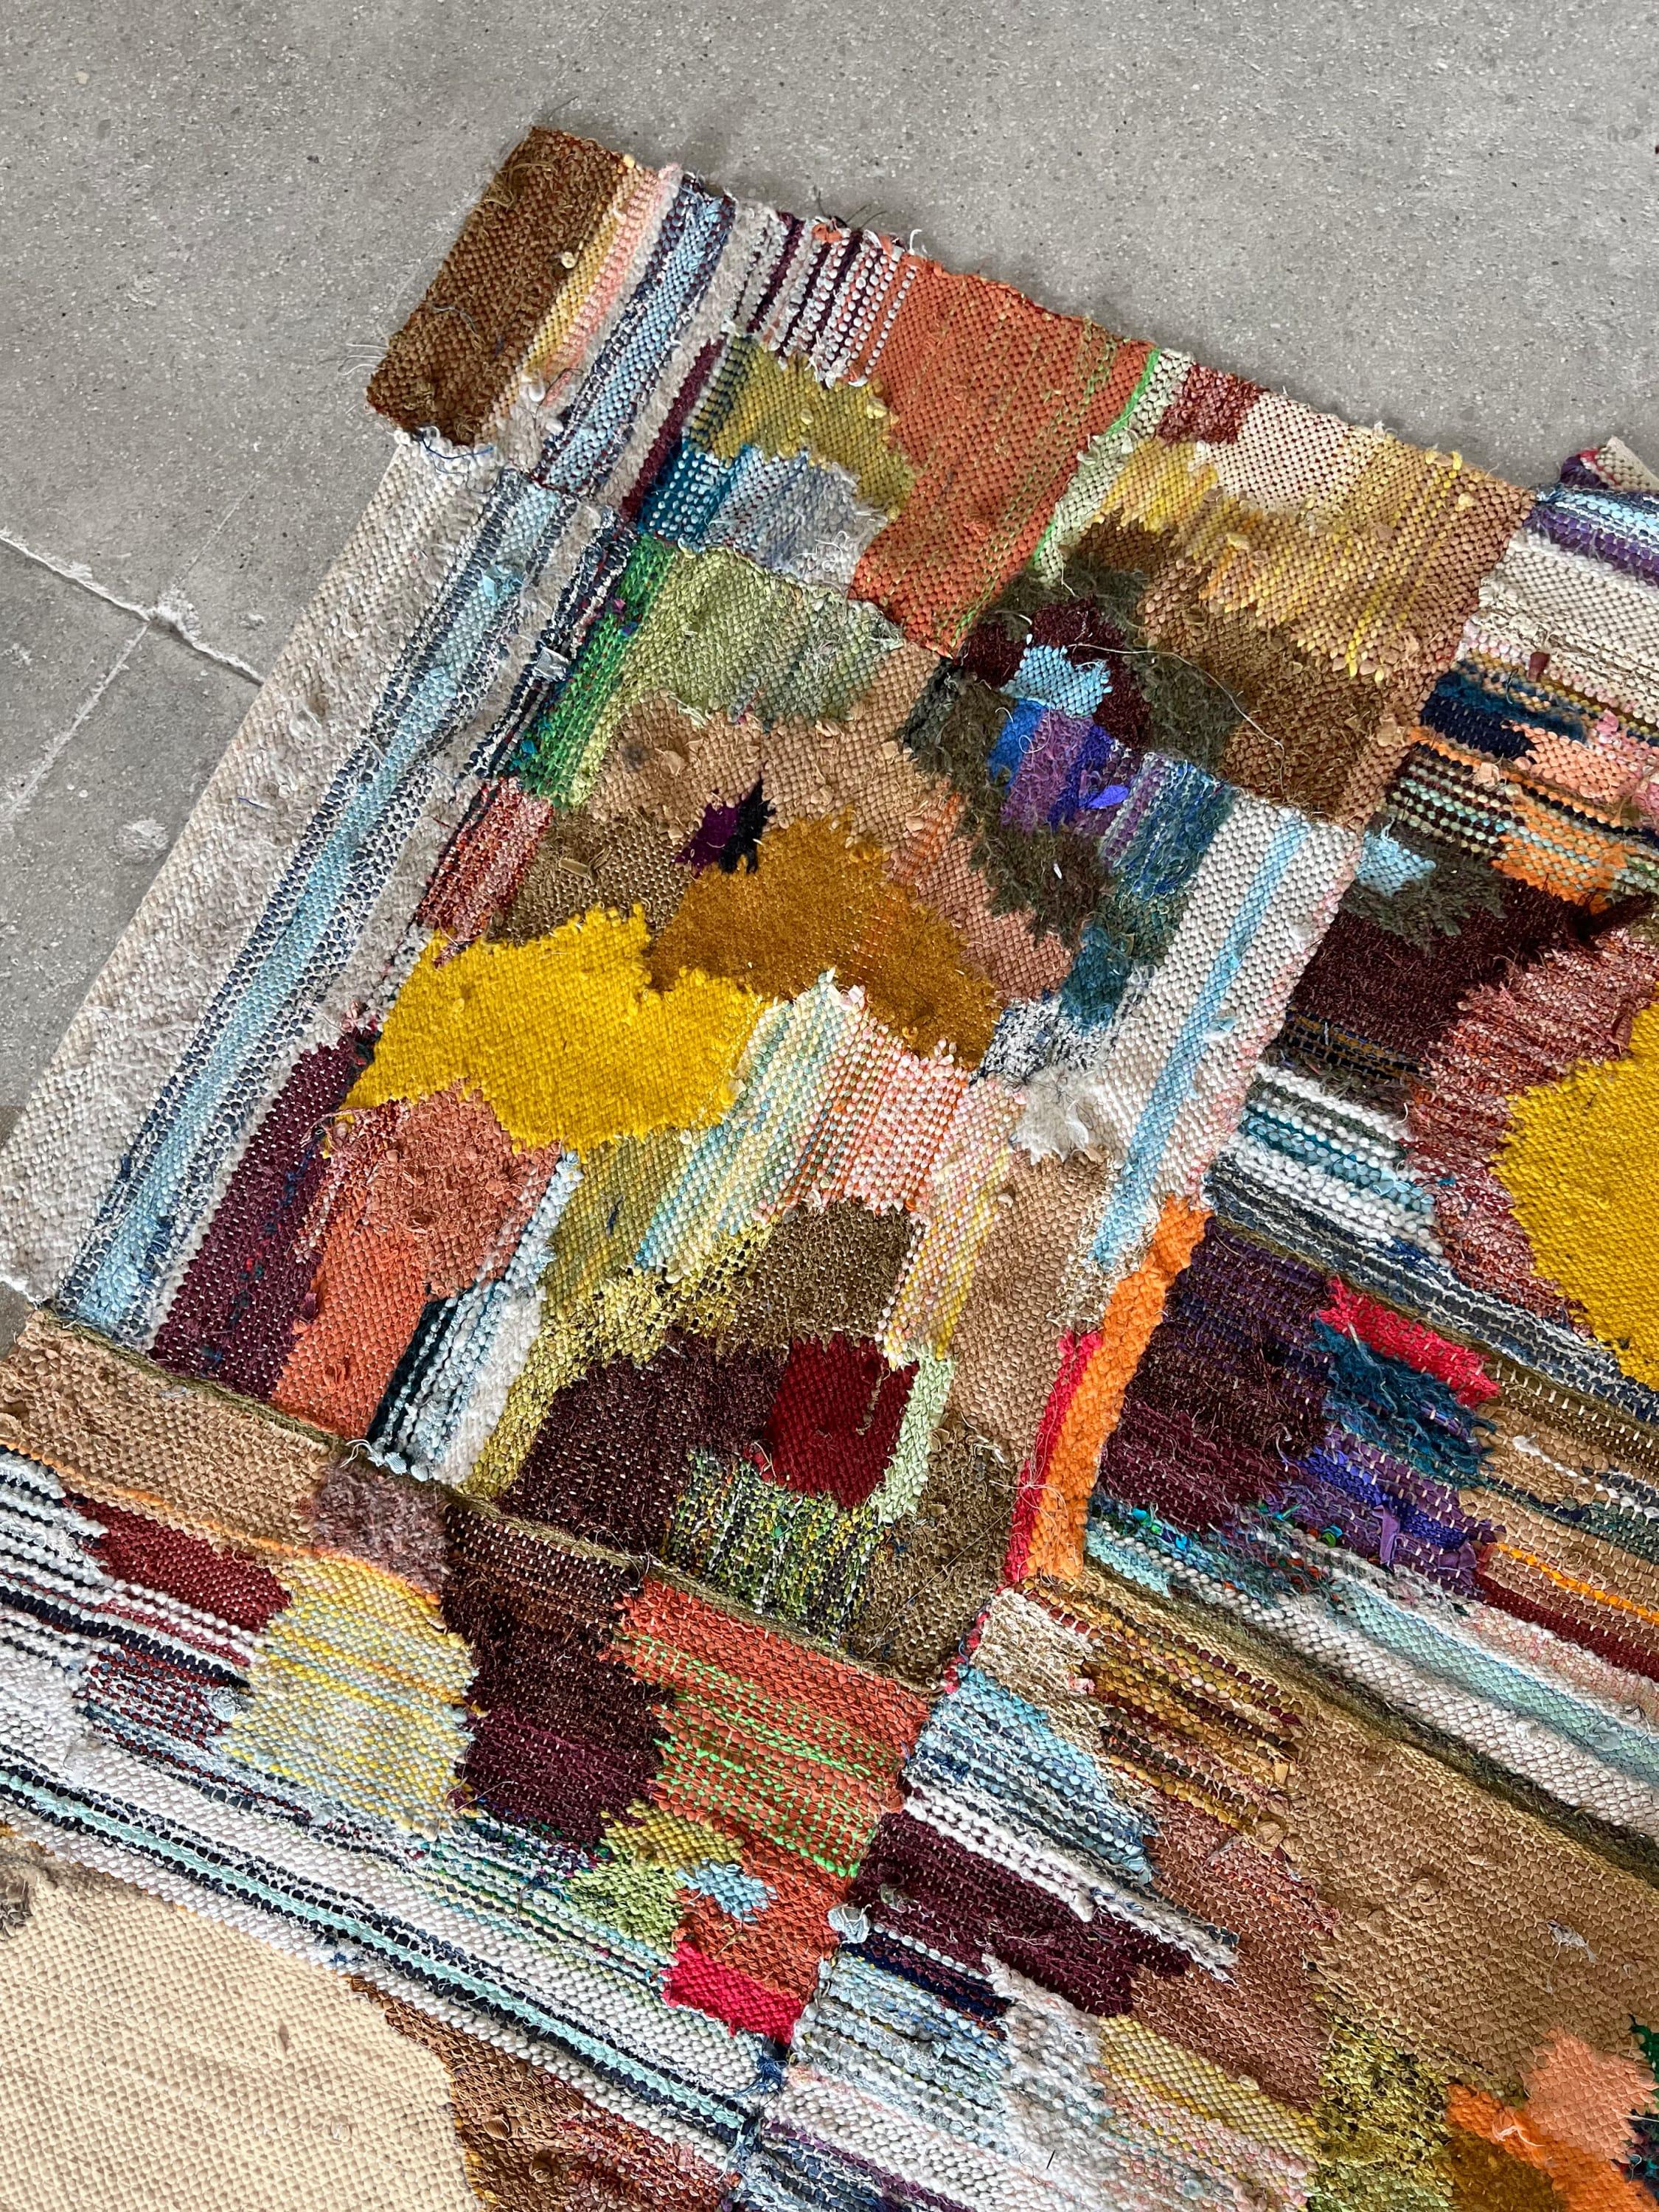 Large hand-woven tapestry made from reclaimed and new materials in the colors of yellow, orange, green, brown, and blue.  Each thread tells a story, woven together in a vibrant symphony of multicolored hues that breathe new life into forgotten